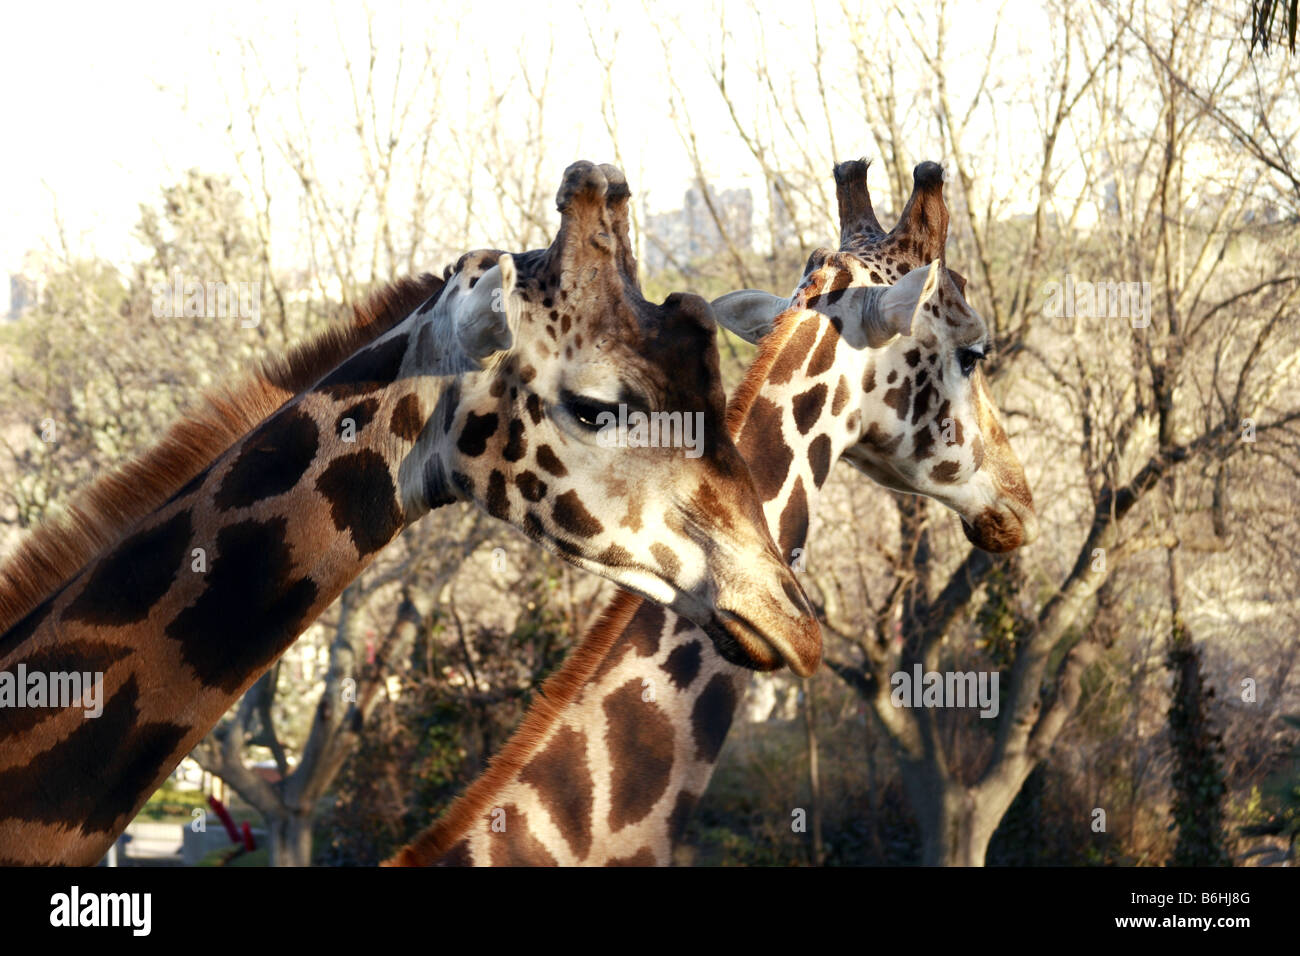 Two giraffes at the Madrid Zoo Stock Photo